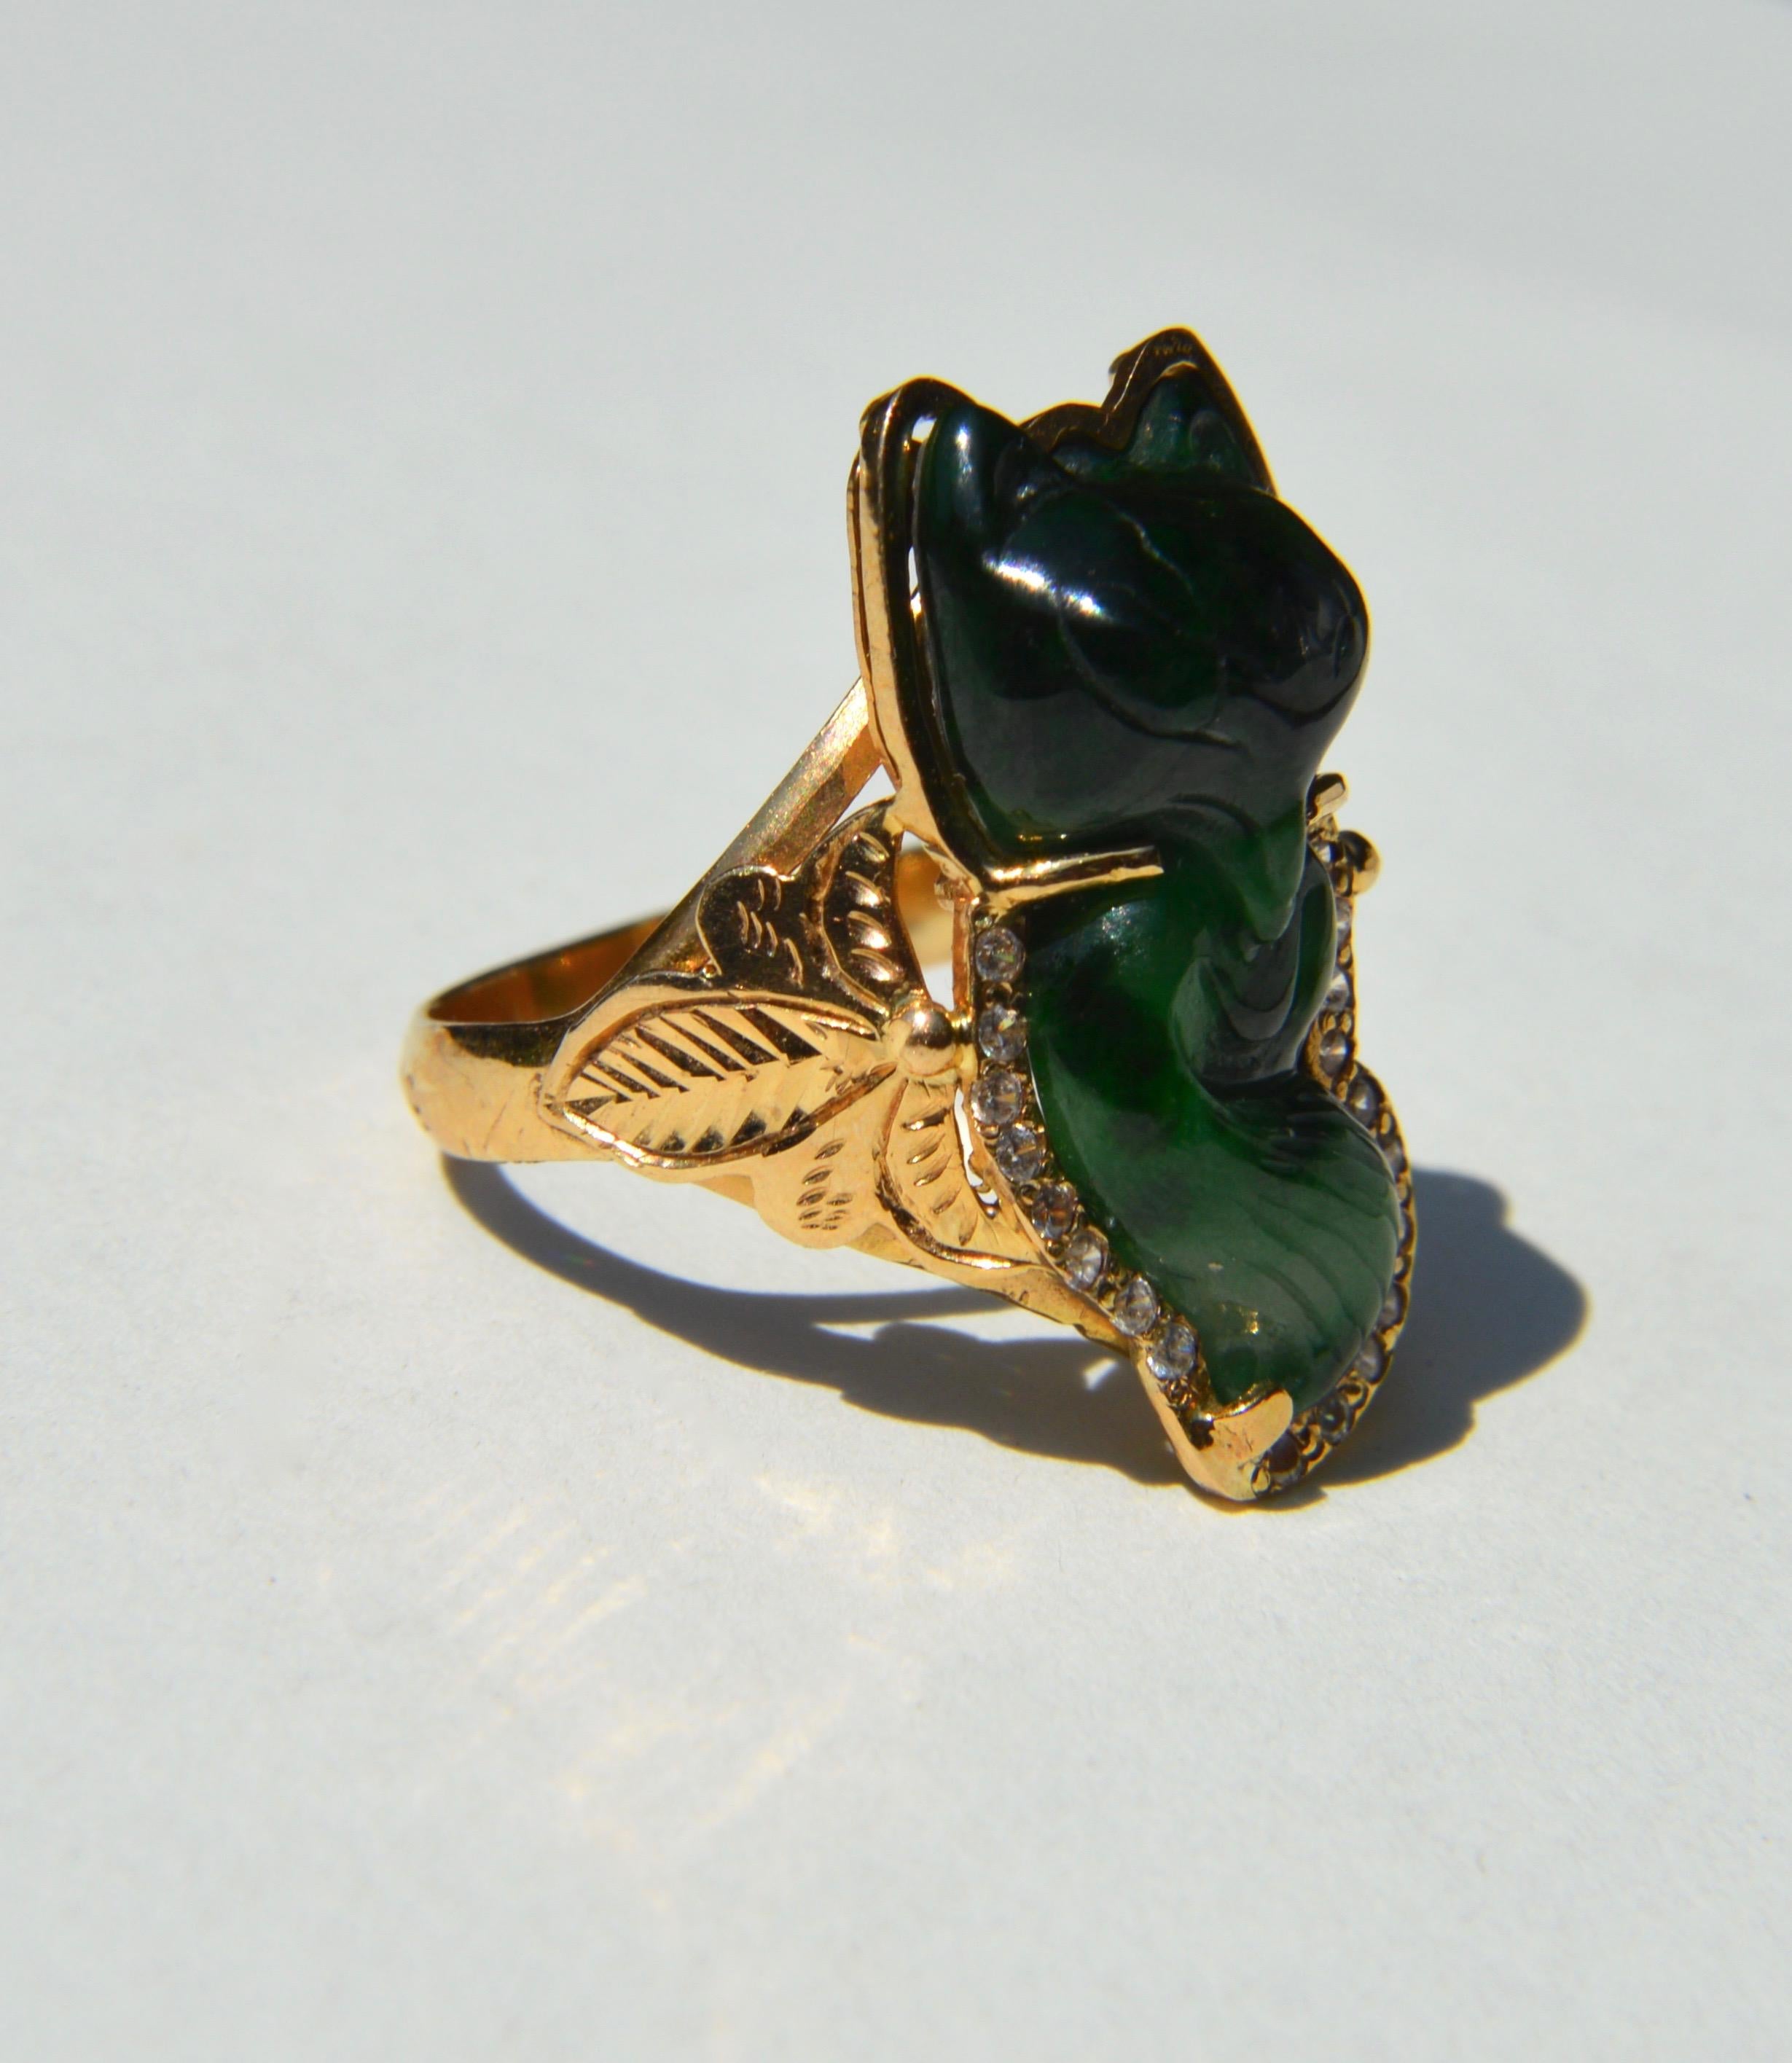 Stunning and adorable hand carved vintage 1950s nephrite deep green jade fox cocktail statement ring with round cut diamonds (1.5mm each). Intricate flying insect or leaf details on shoulders. Gold is unmarked but tested as solid 14K yellow gold. In